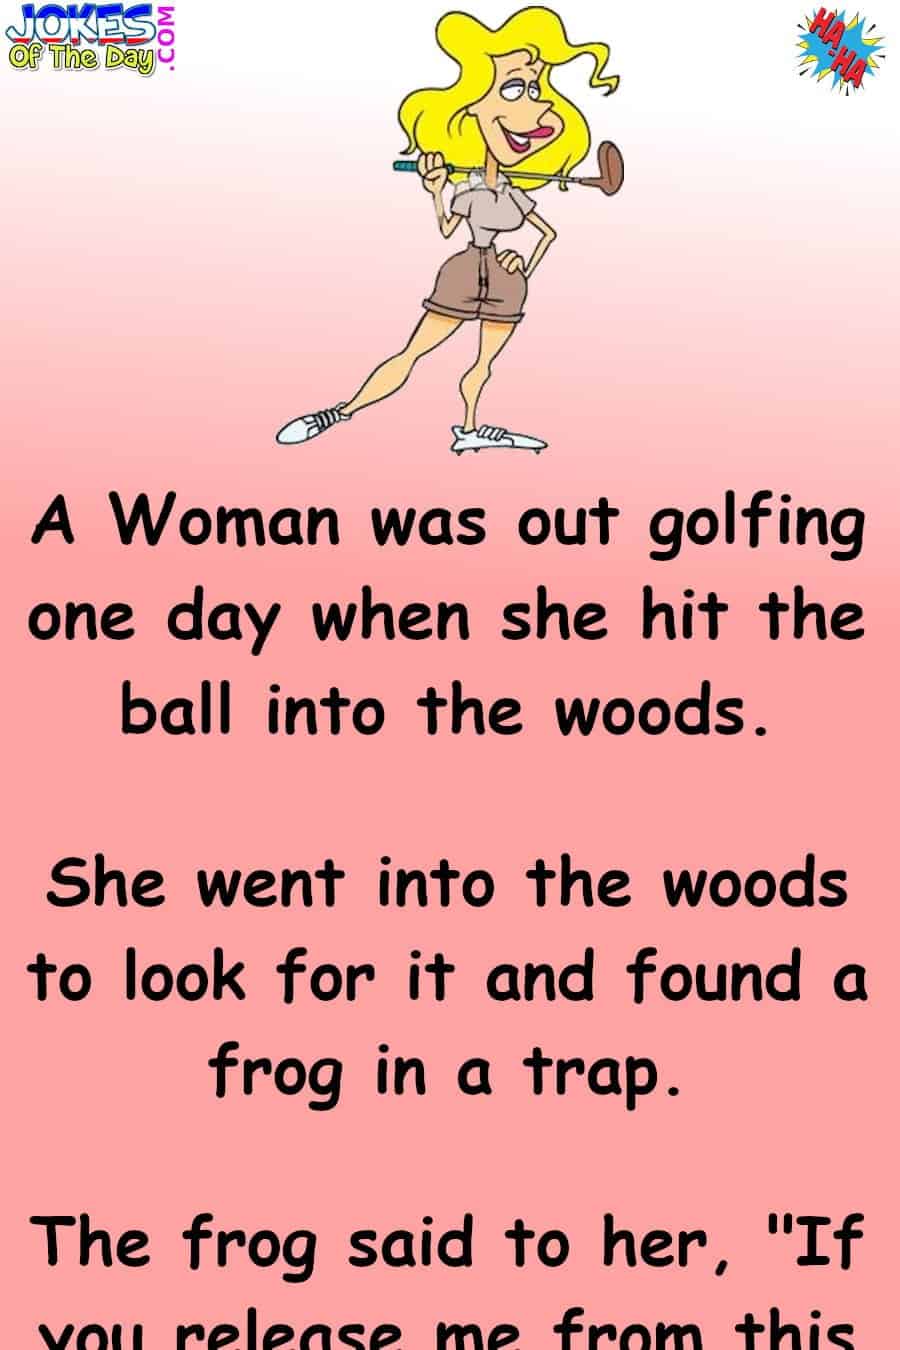 Marriage Humor - A woman is out golfing and finds a frog trapped in the woods  ‣ Jokes Of The Day 